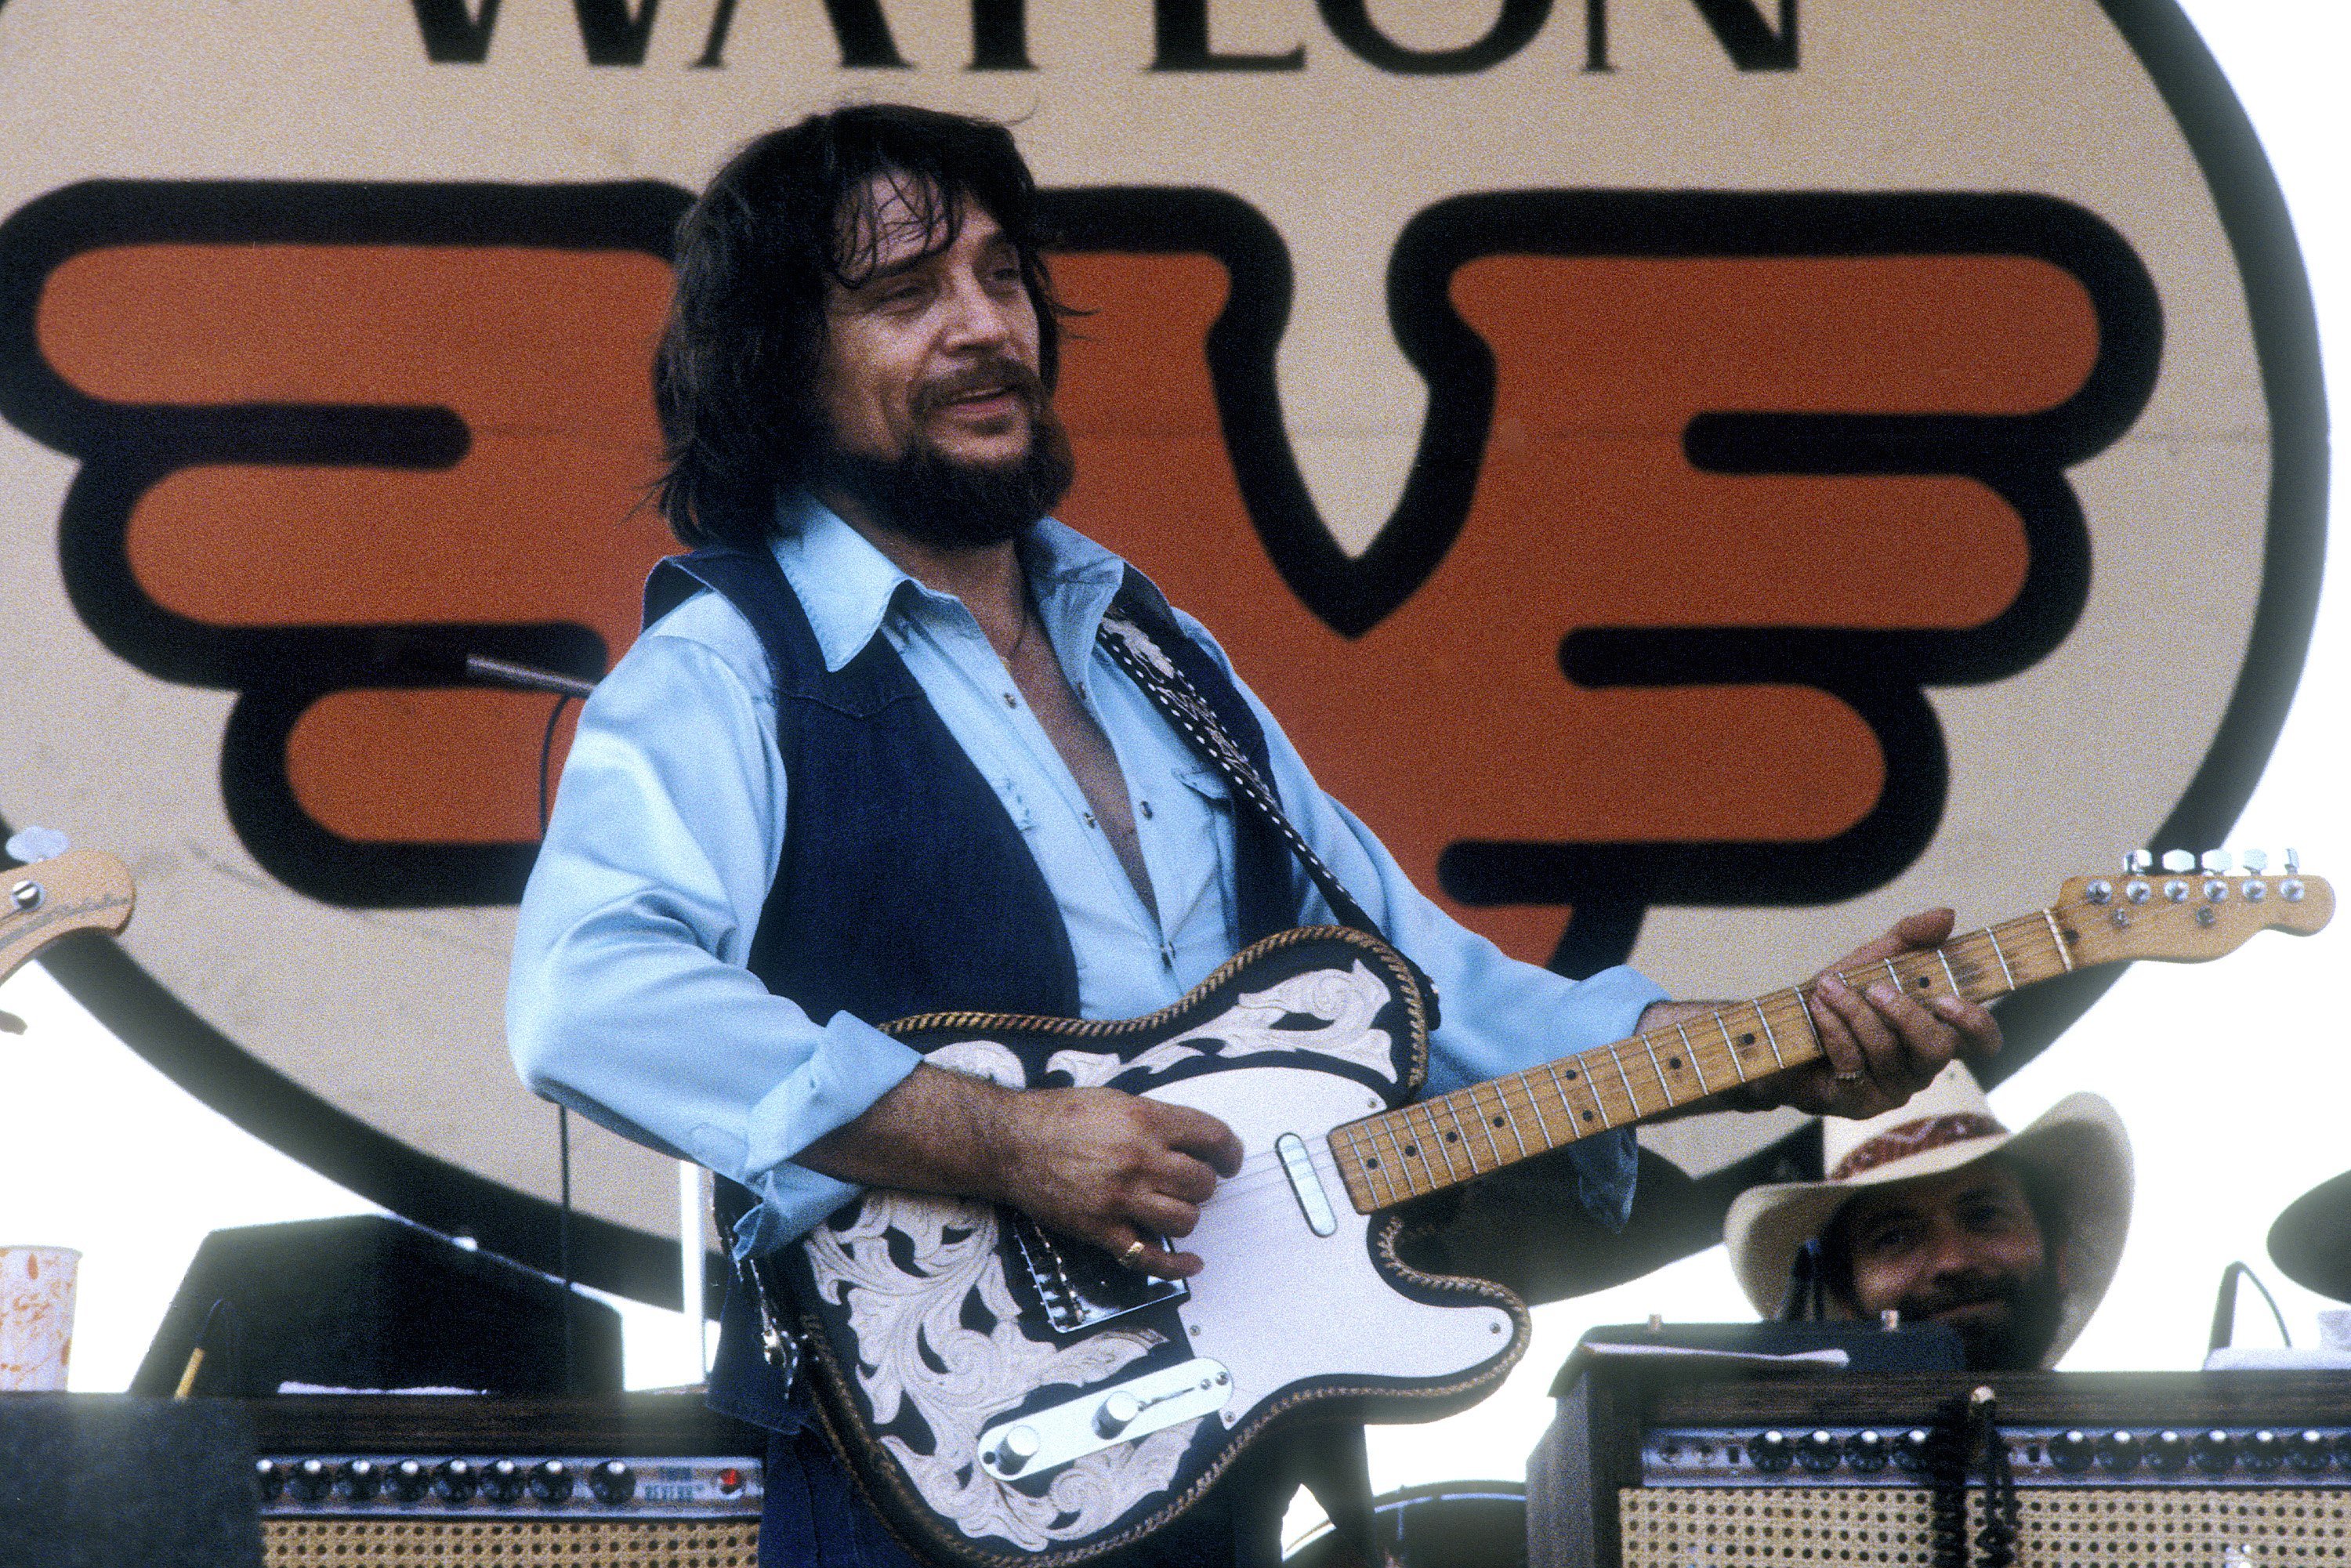 Waylon Jennings performs with 'Willie Nelson' at the Spartan Stadium in San Jose, California on July 26, 1982 | Source: Getty Images